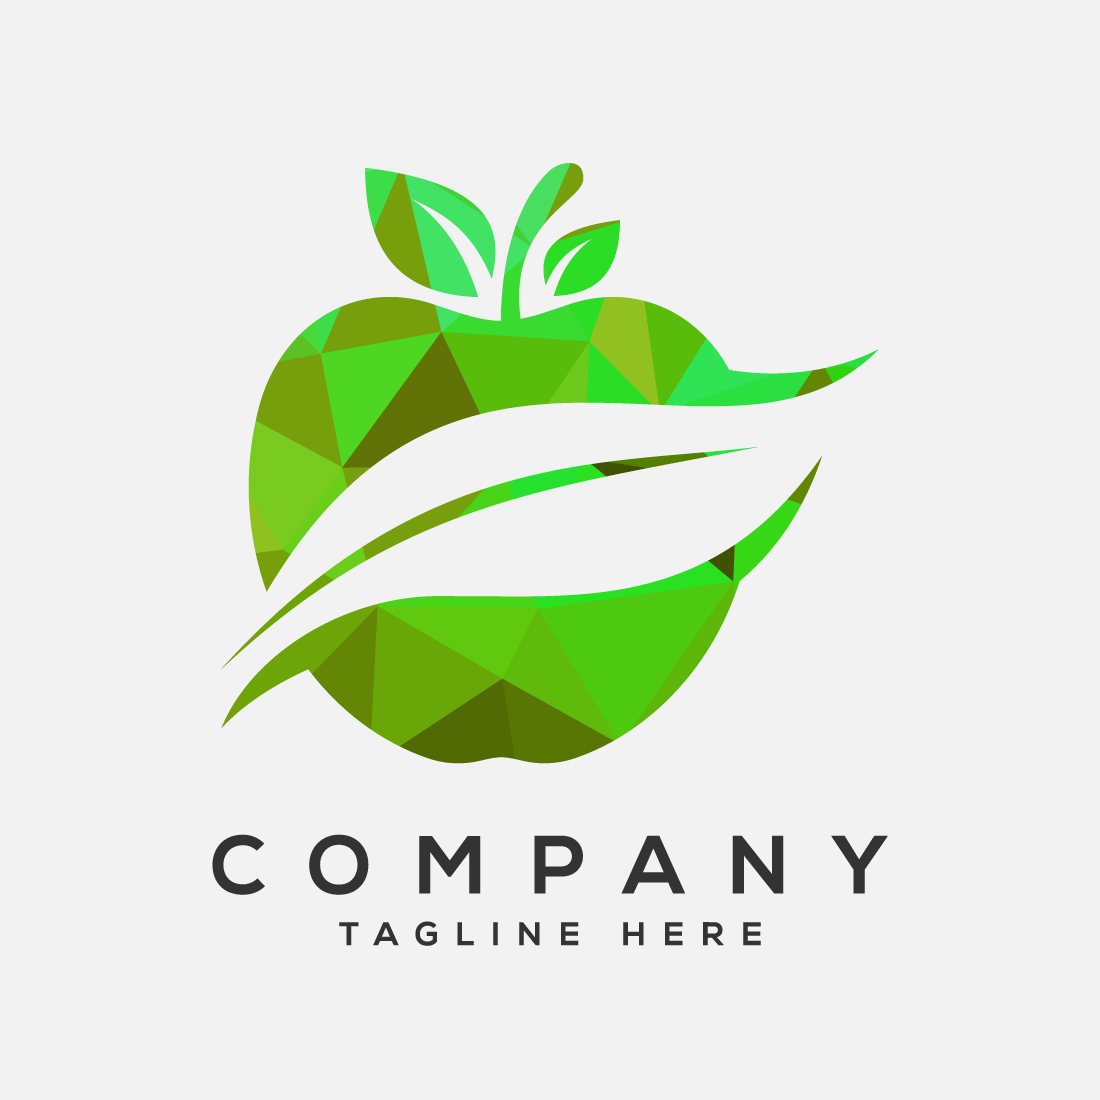 Low poly style apple logo sign symbol Apple sign with negative space leaf preview image.